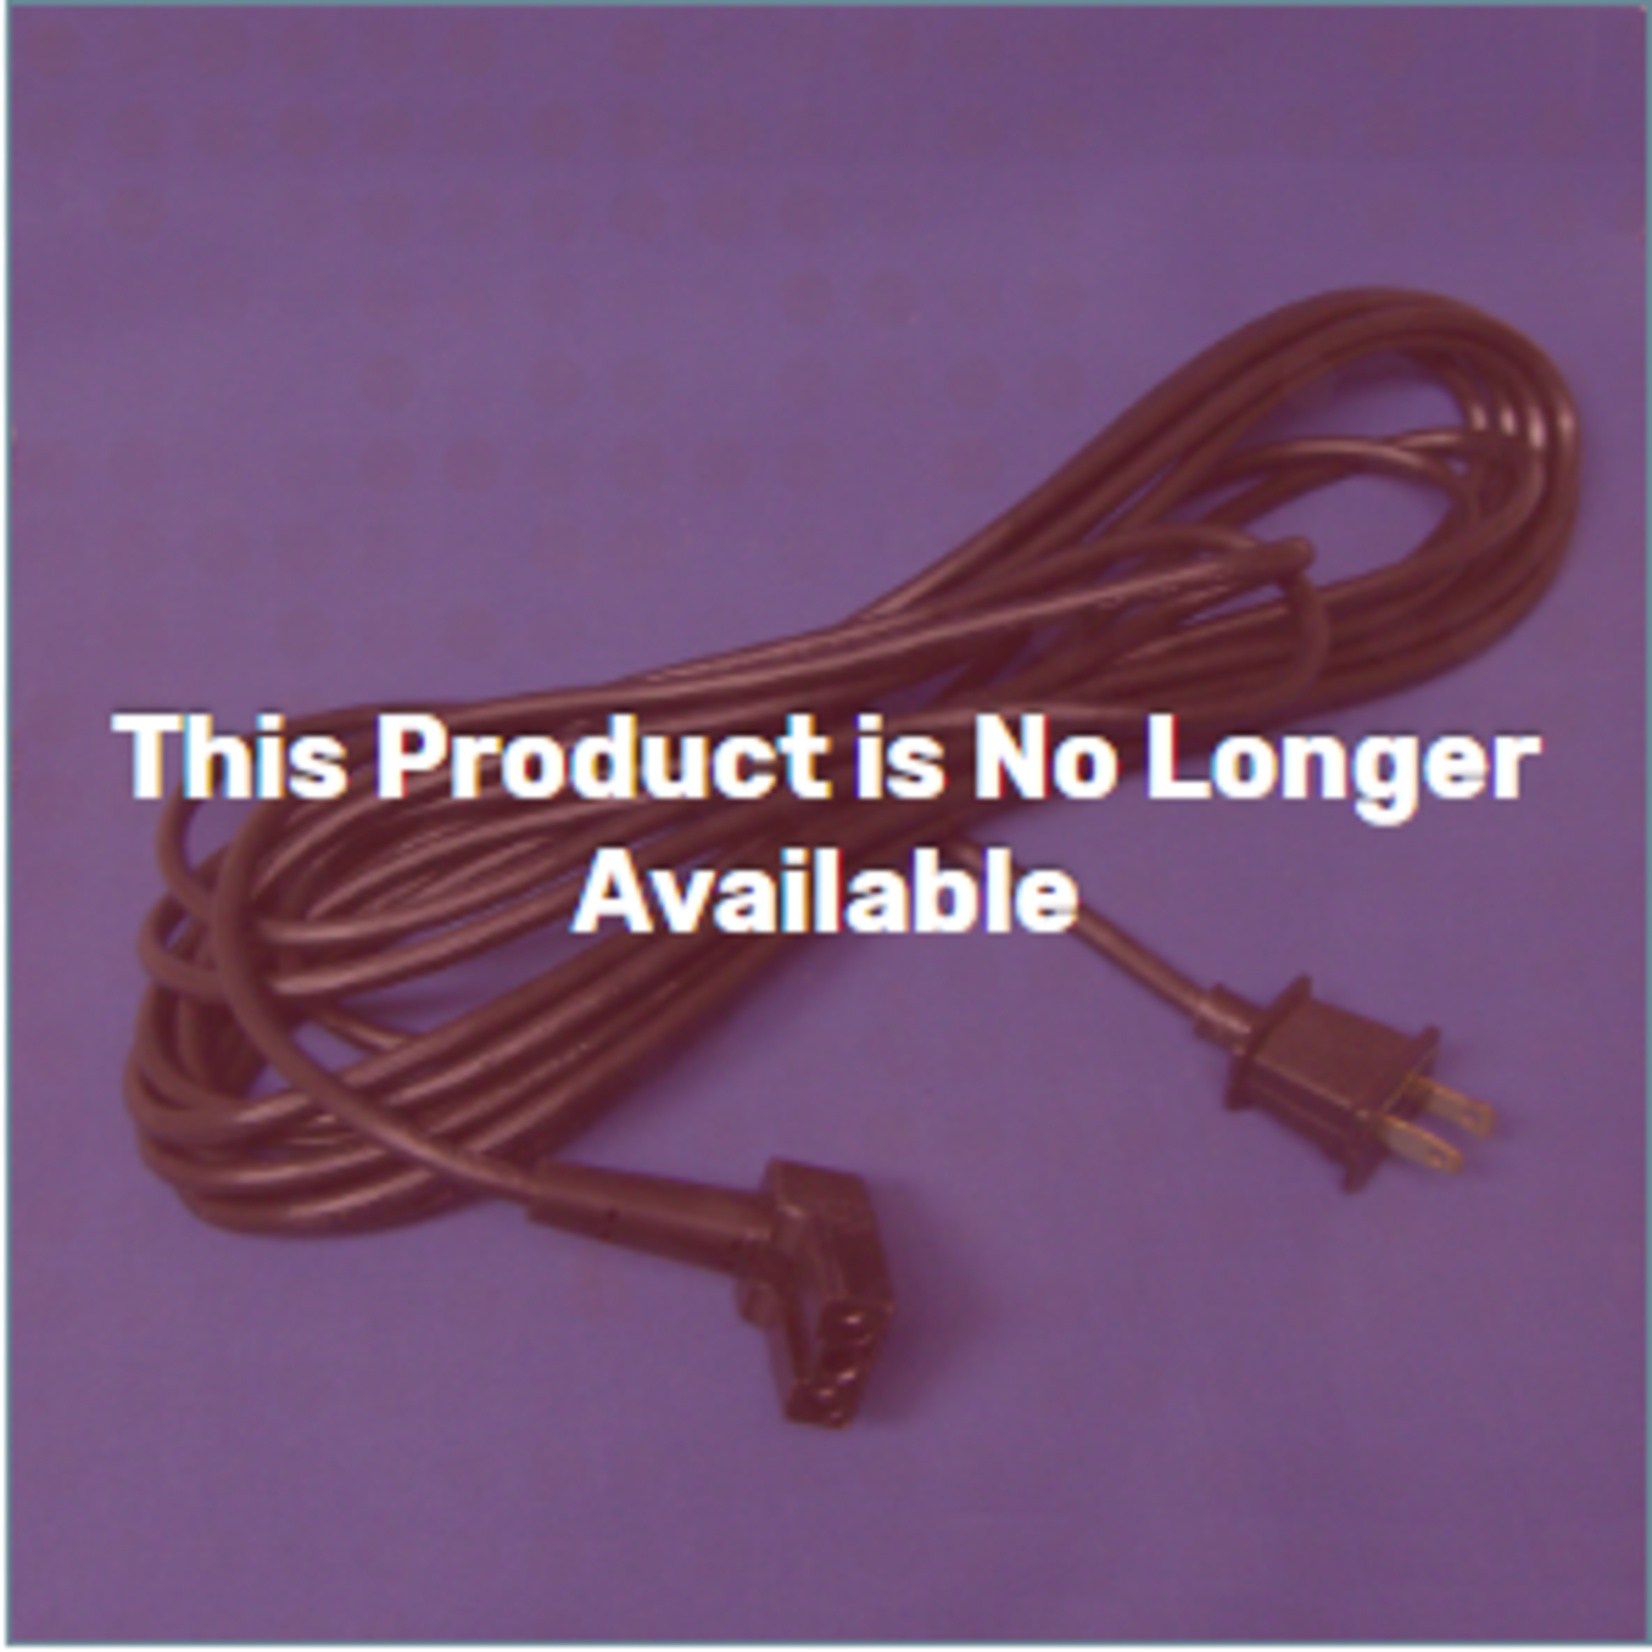 Hoover Genuine Hoover Power Cord For Concept II *NO LONGER AVAILABLE*